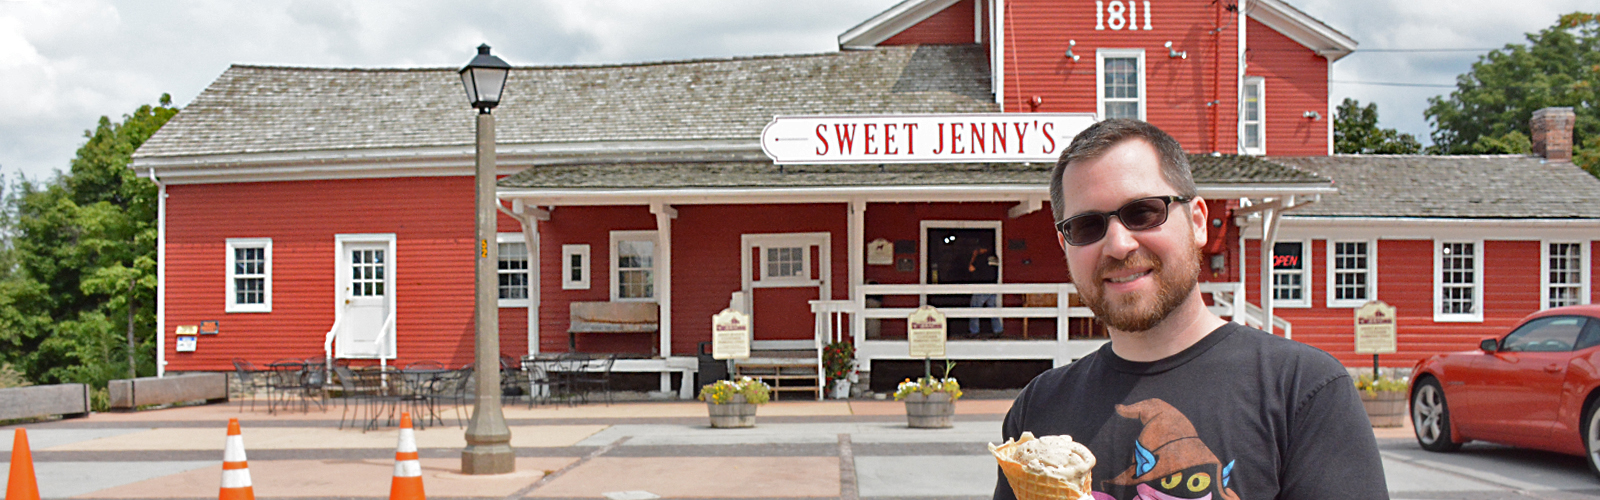 Howard Cadmus stands outside of his popular confection and ice cream shop. Built in 1811, the building originally operated as a saw mill.